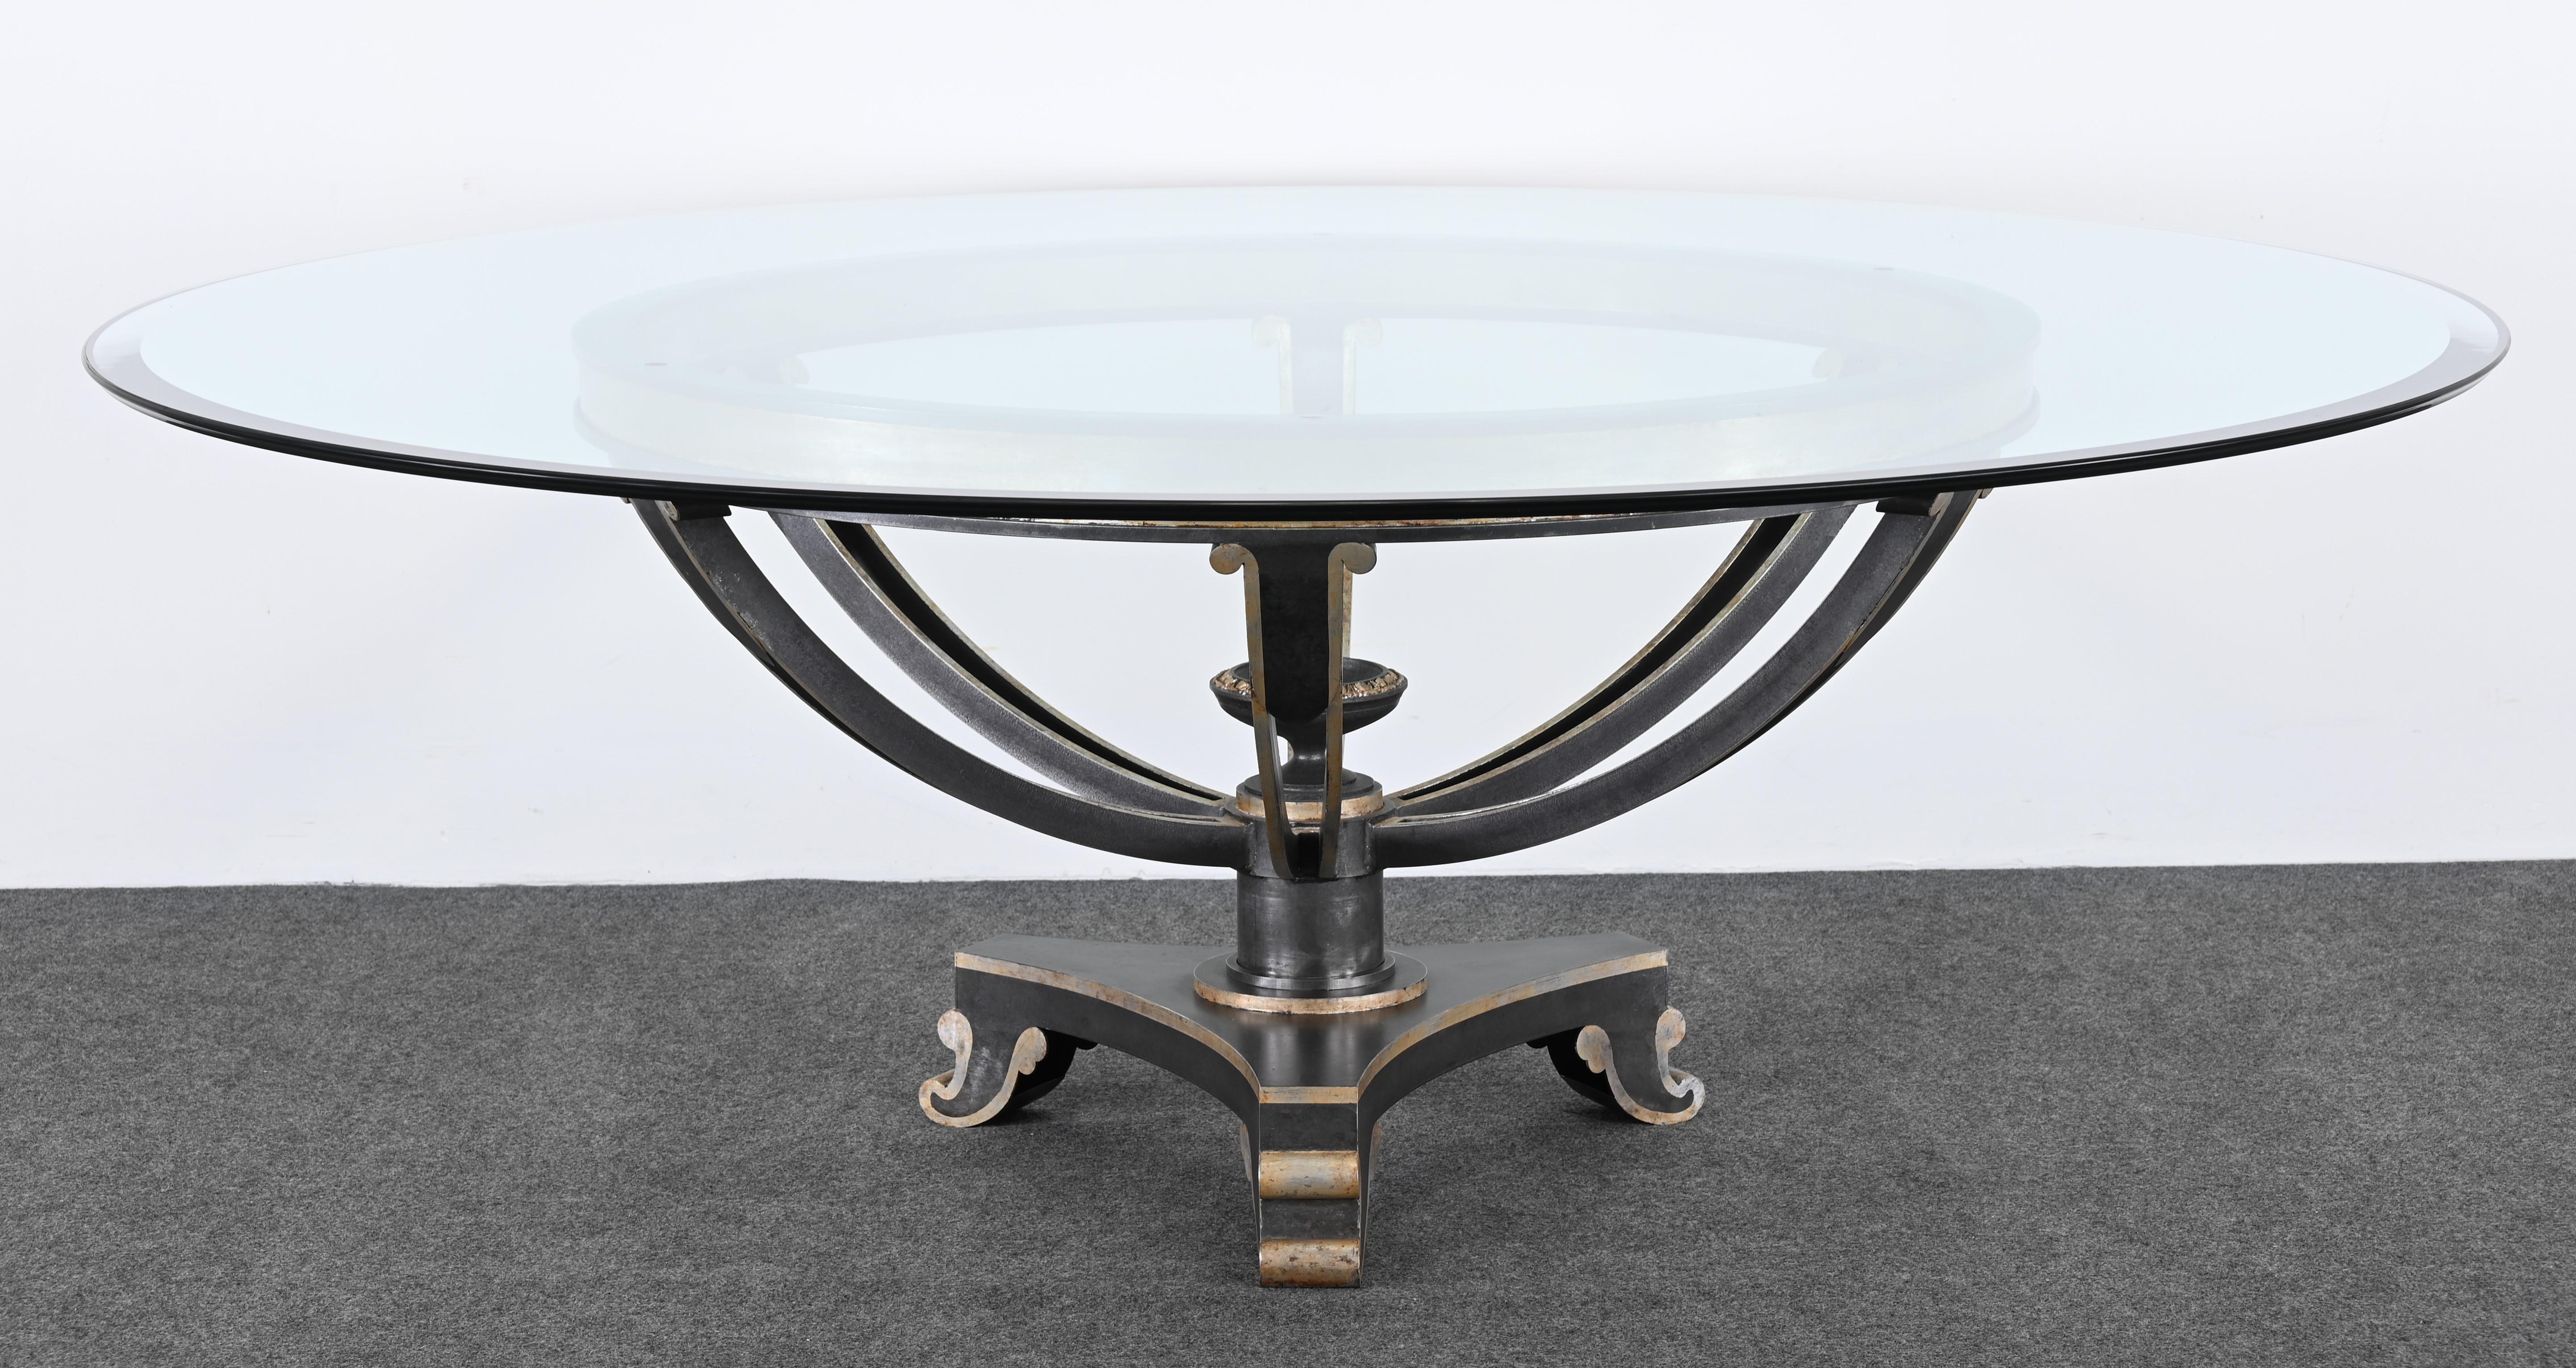 Neoclassical Monumental Table by Niermann Weeks, 20th Century For Sale